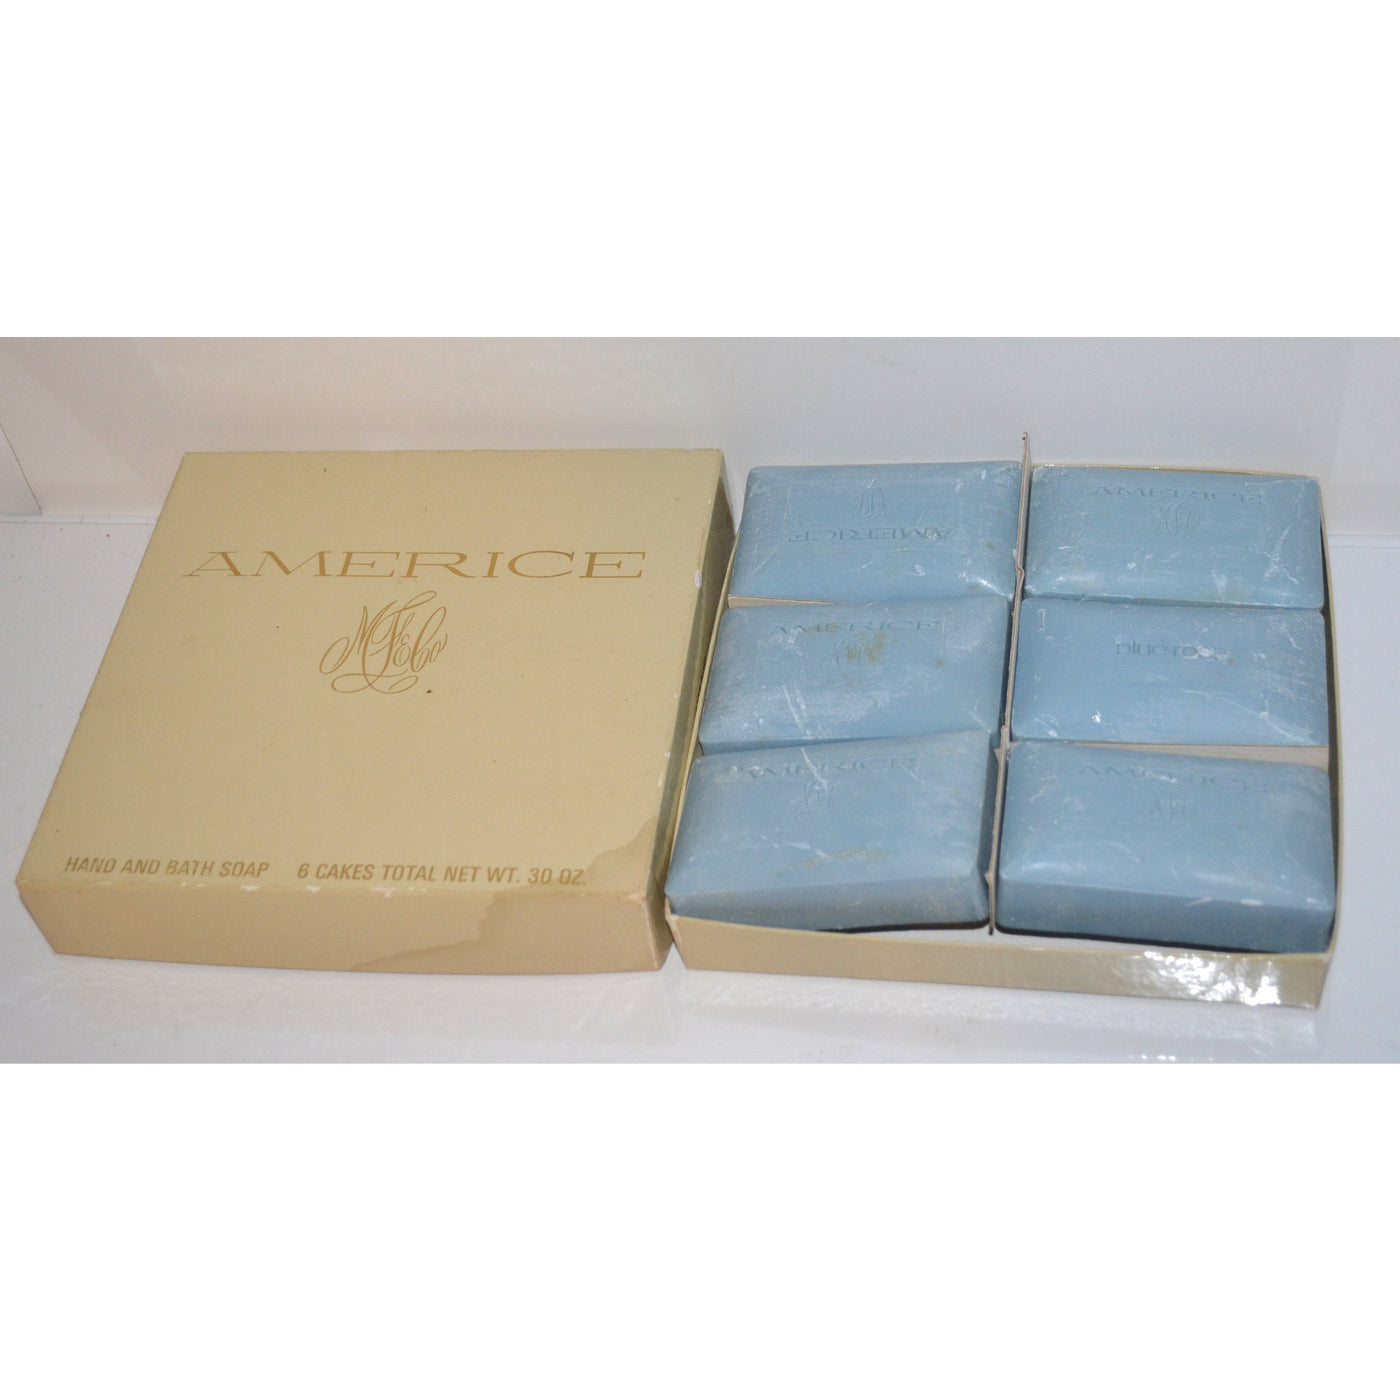 Vintage Americe Soaps By Marshall Field & Company